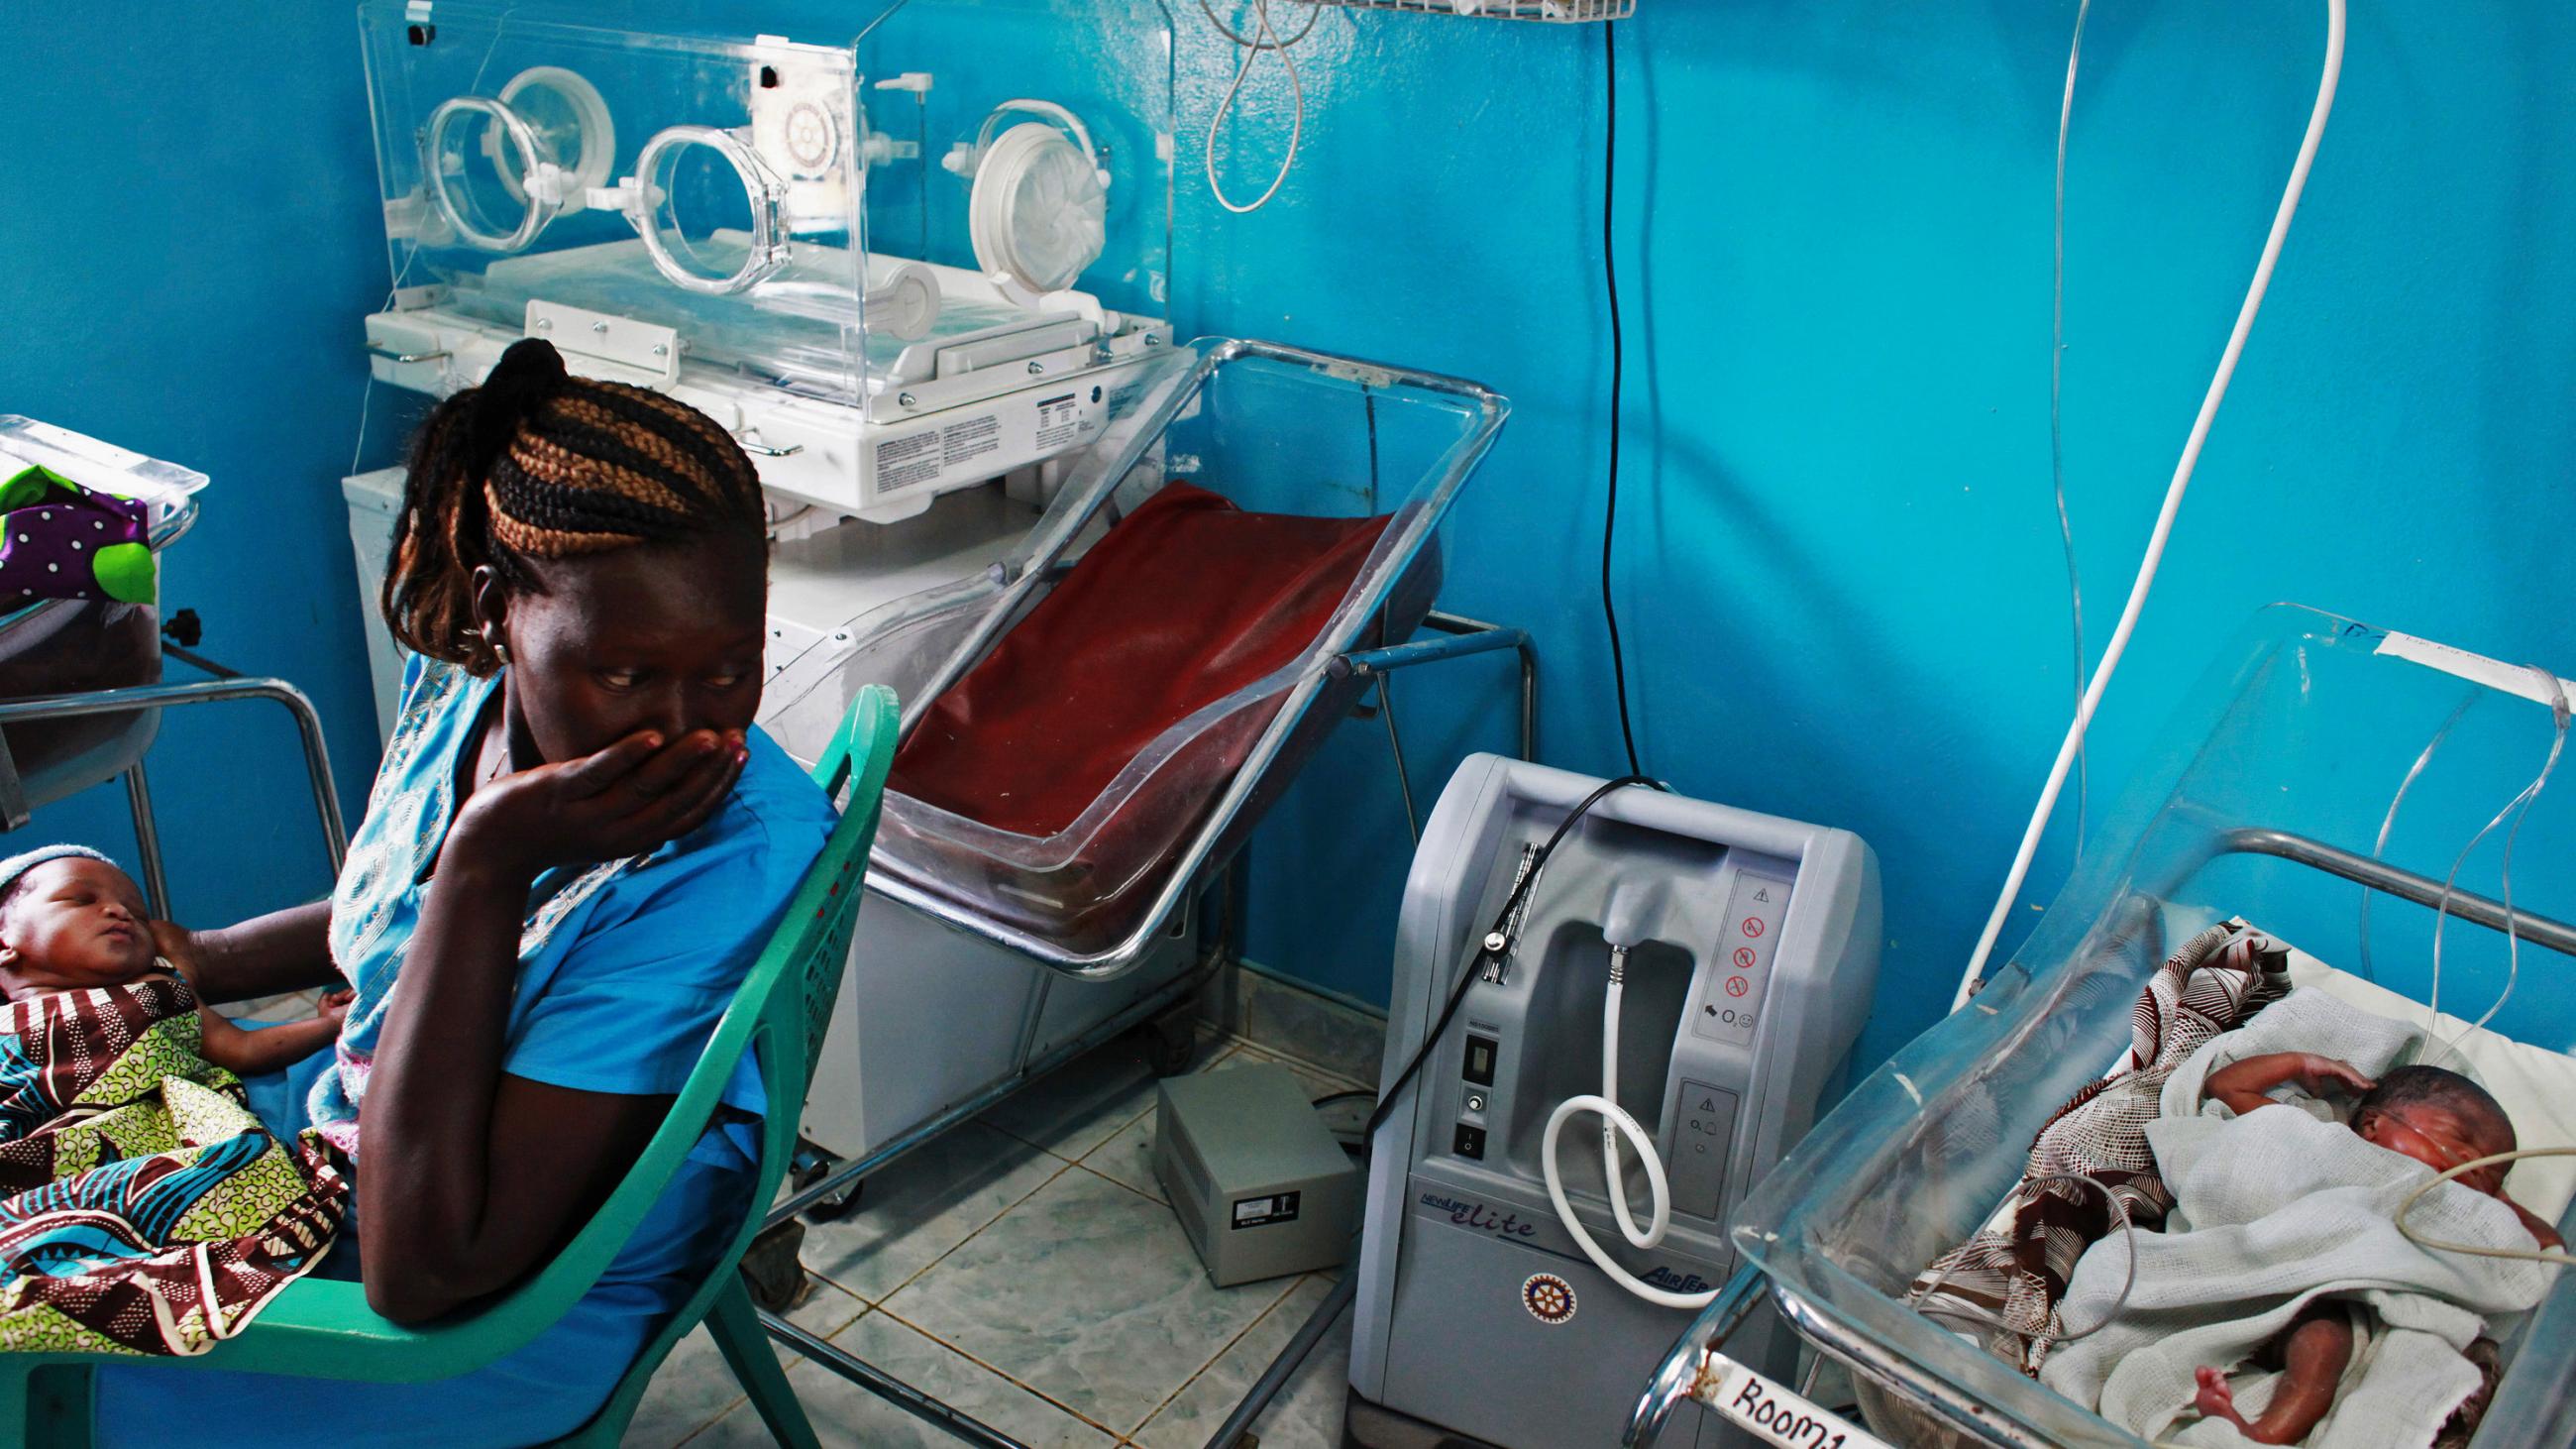 The photo shows the woman looking back at her baby, who is sleeping in a small hospital bed. 